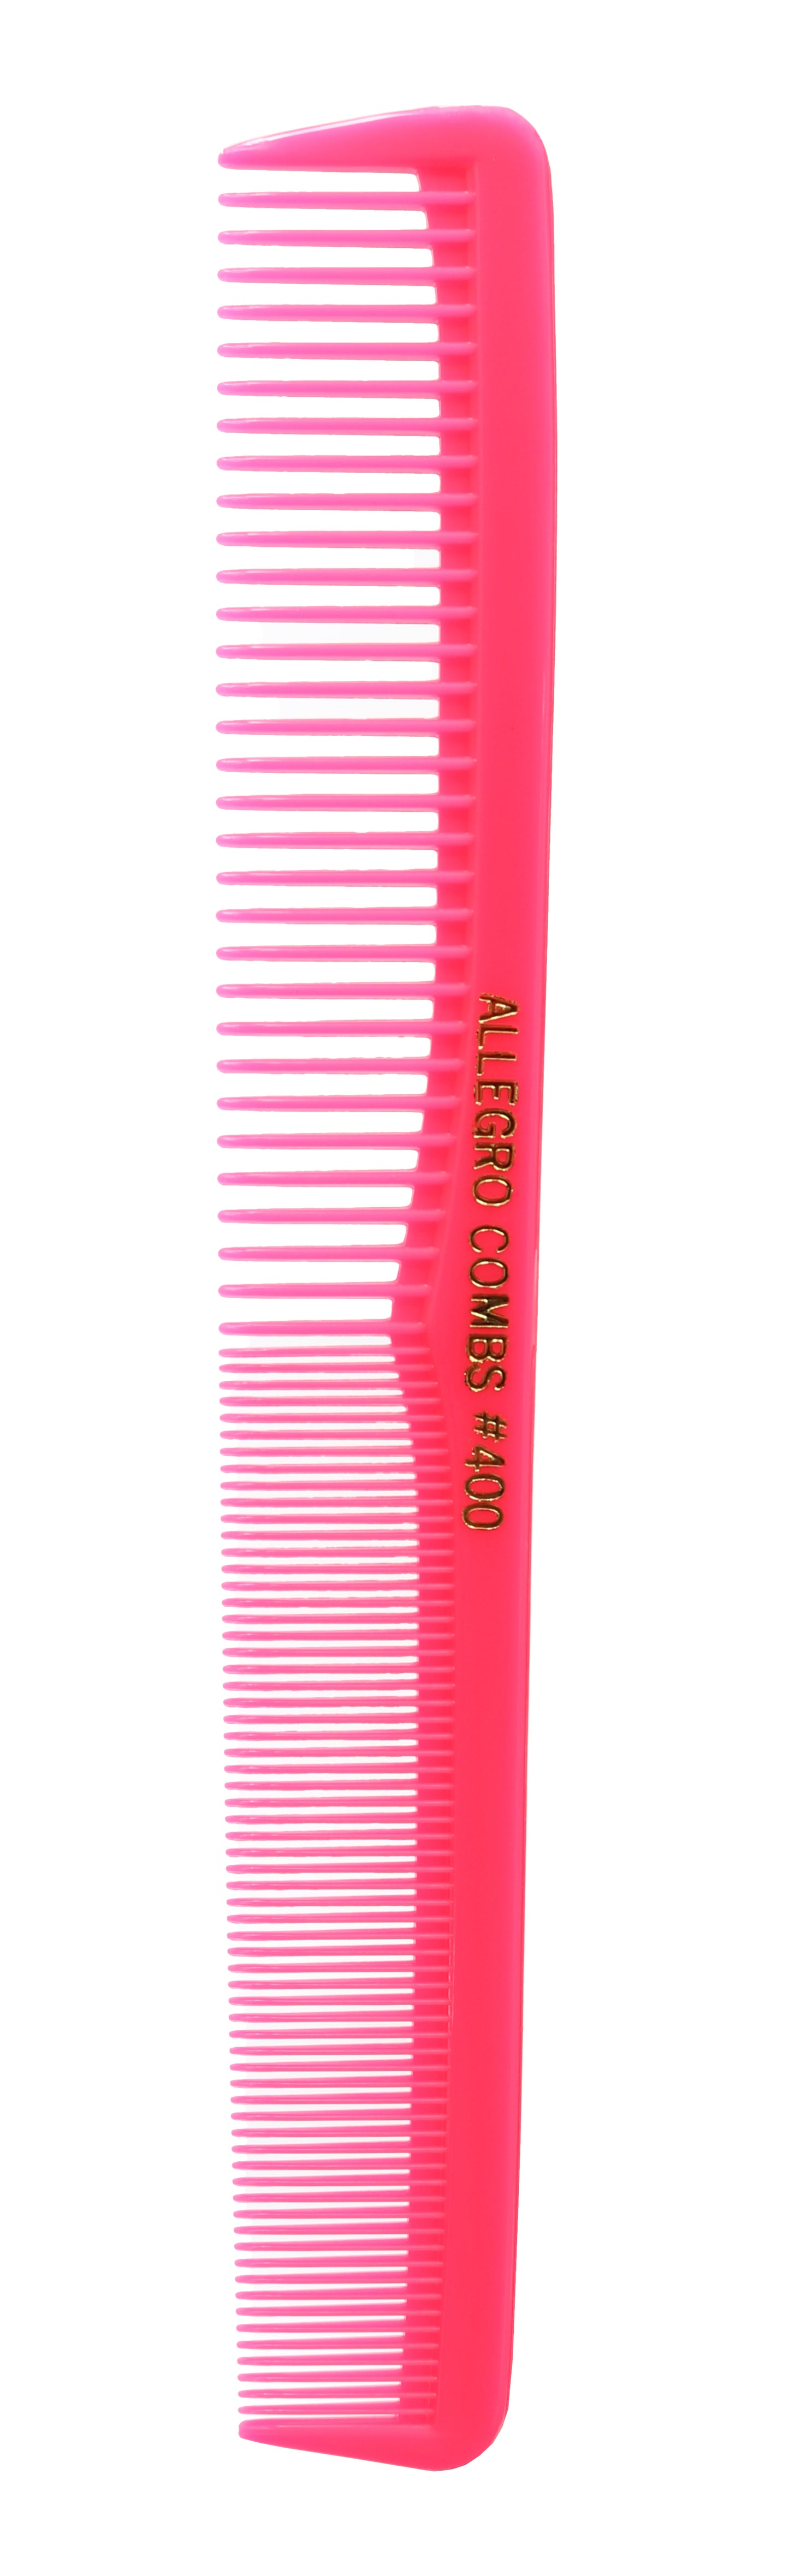 Allegro Combs 400 Barbers Combs Cutting Combs All Purpose Combs. Neon Pink Combs. 12 Pk